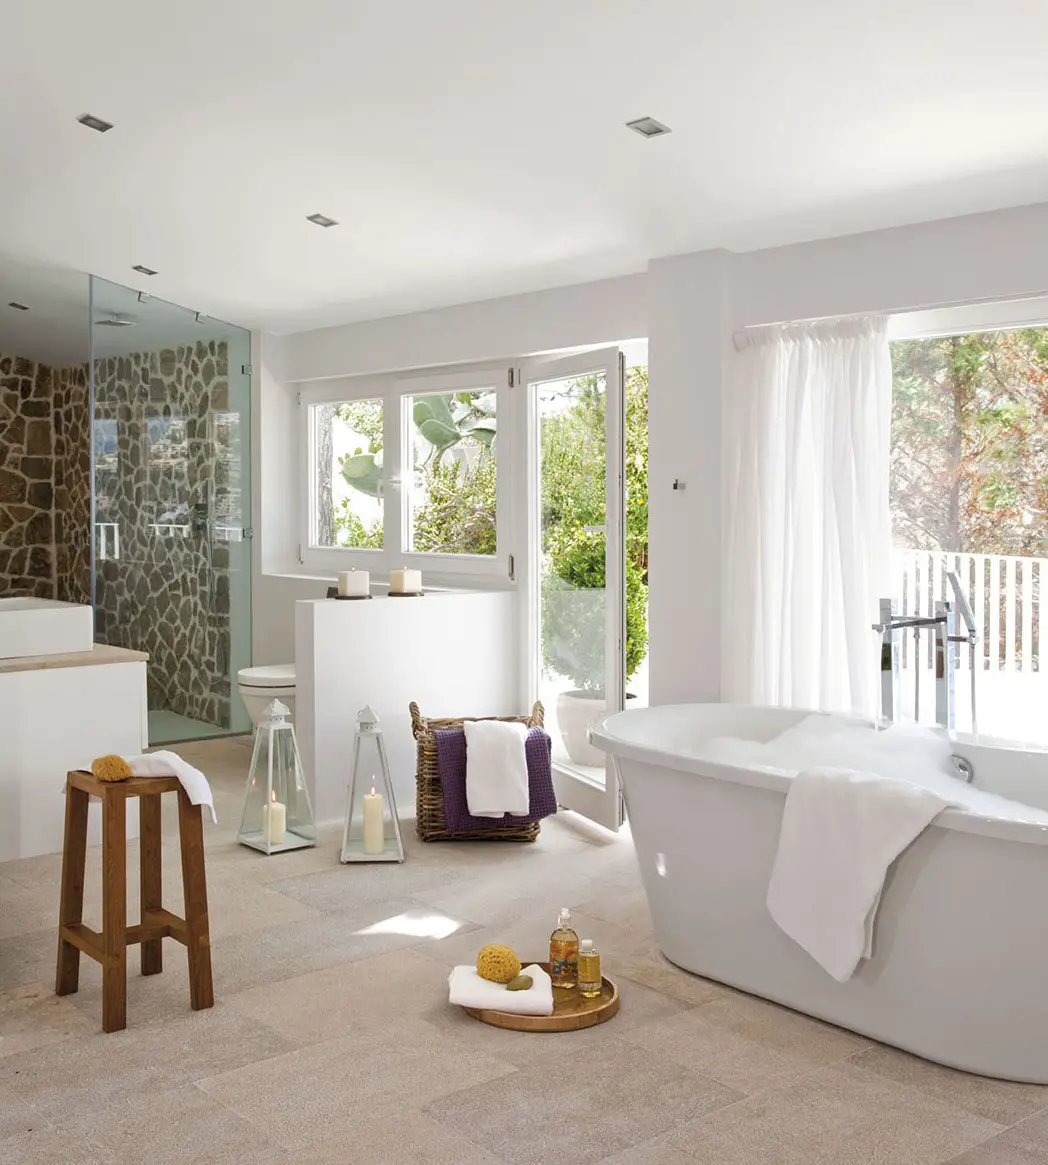 A house with a white bathroom featuring a bathtub and sink.